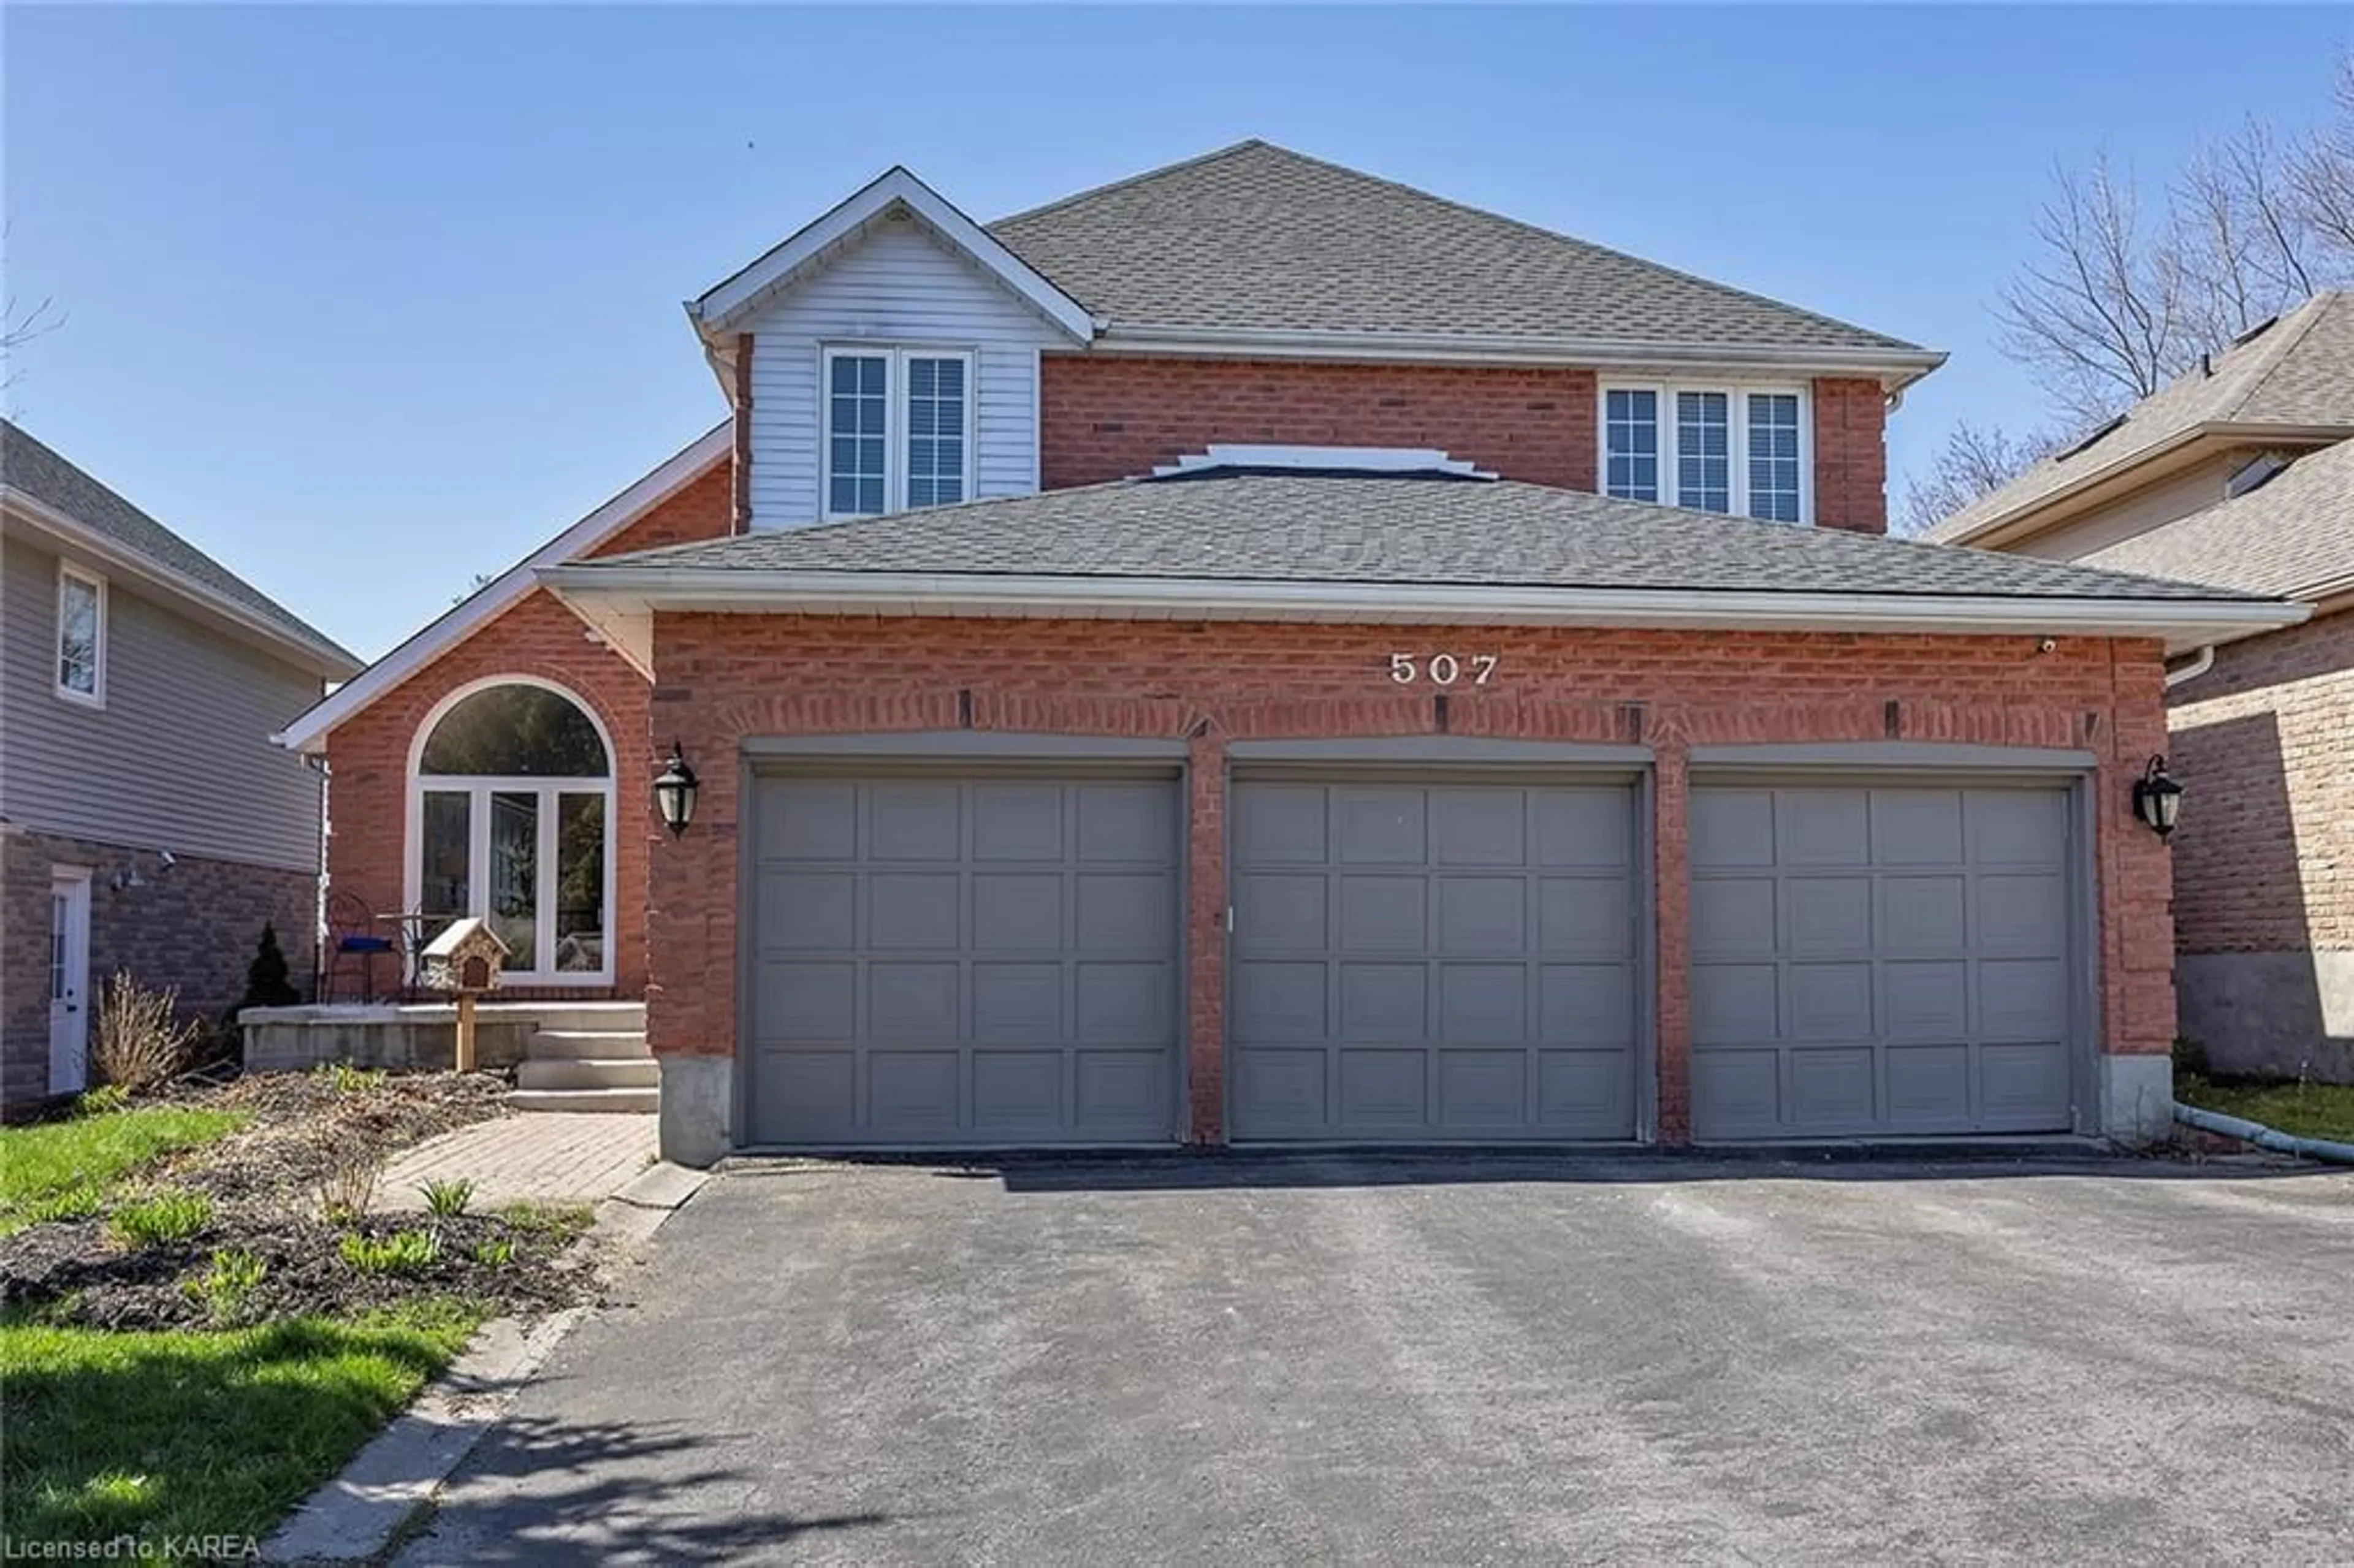 Home with brick exterior material for 507 Forest Hill Dr, Kingston Ontario K7M 8M5